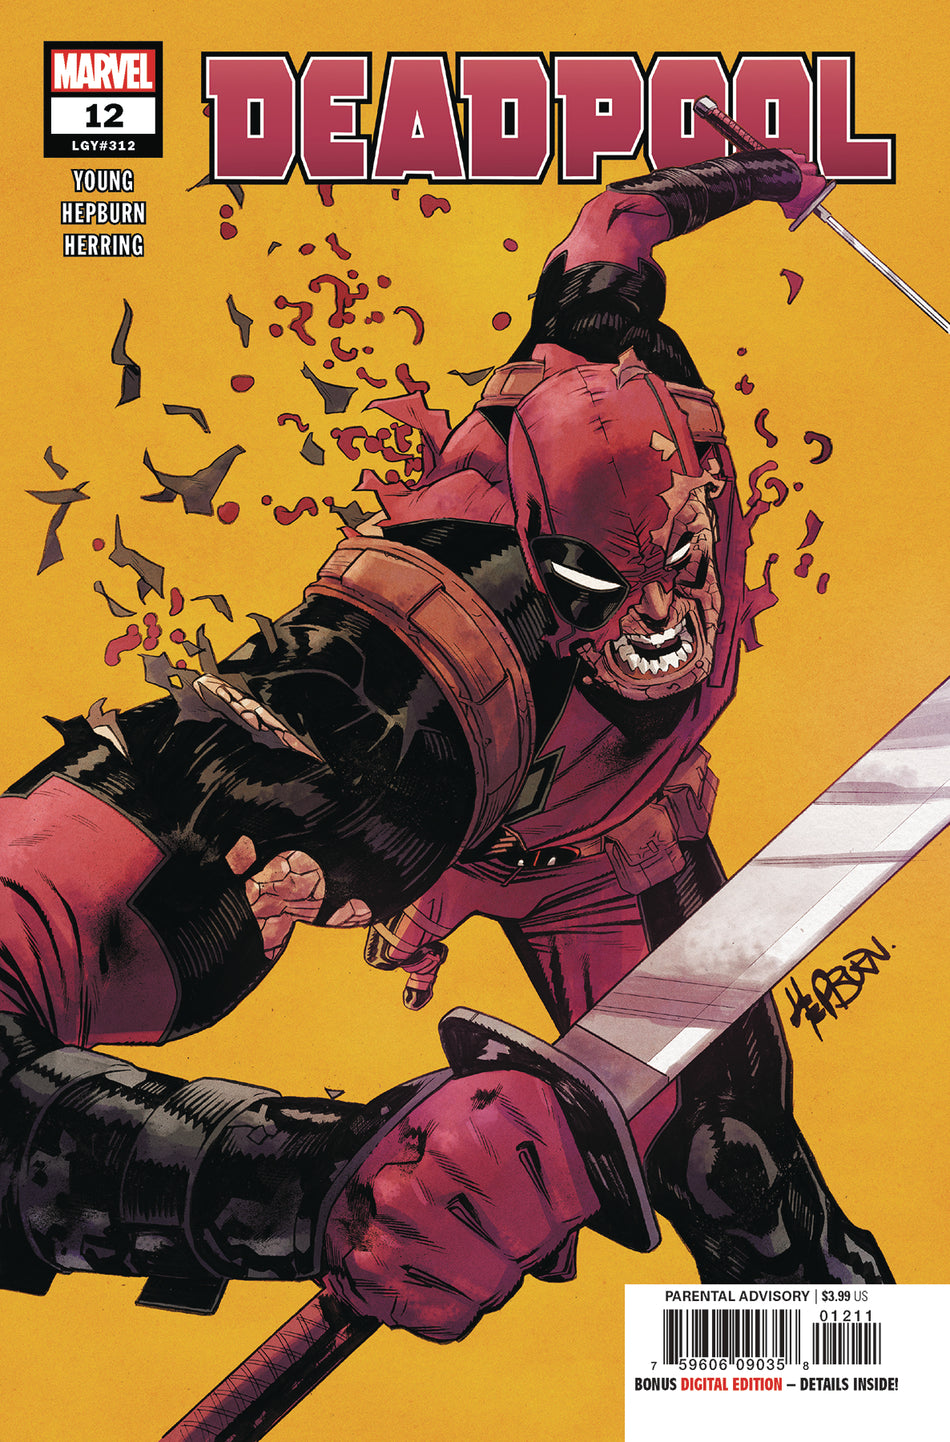 Photo of Deadpool Issue 12 comic sold by Stronghold Collectibles